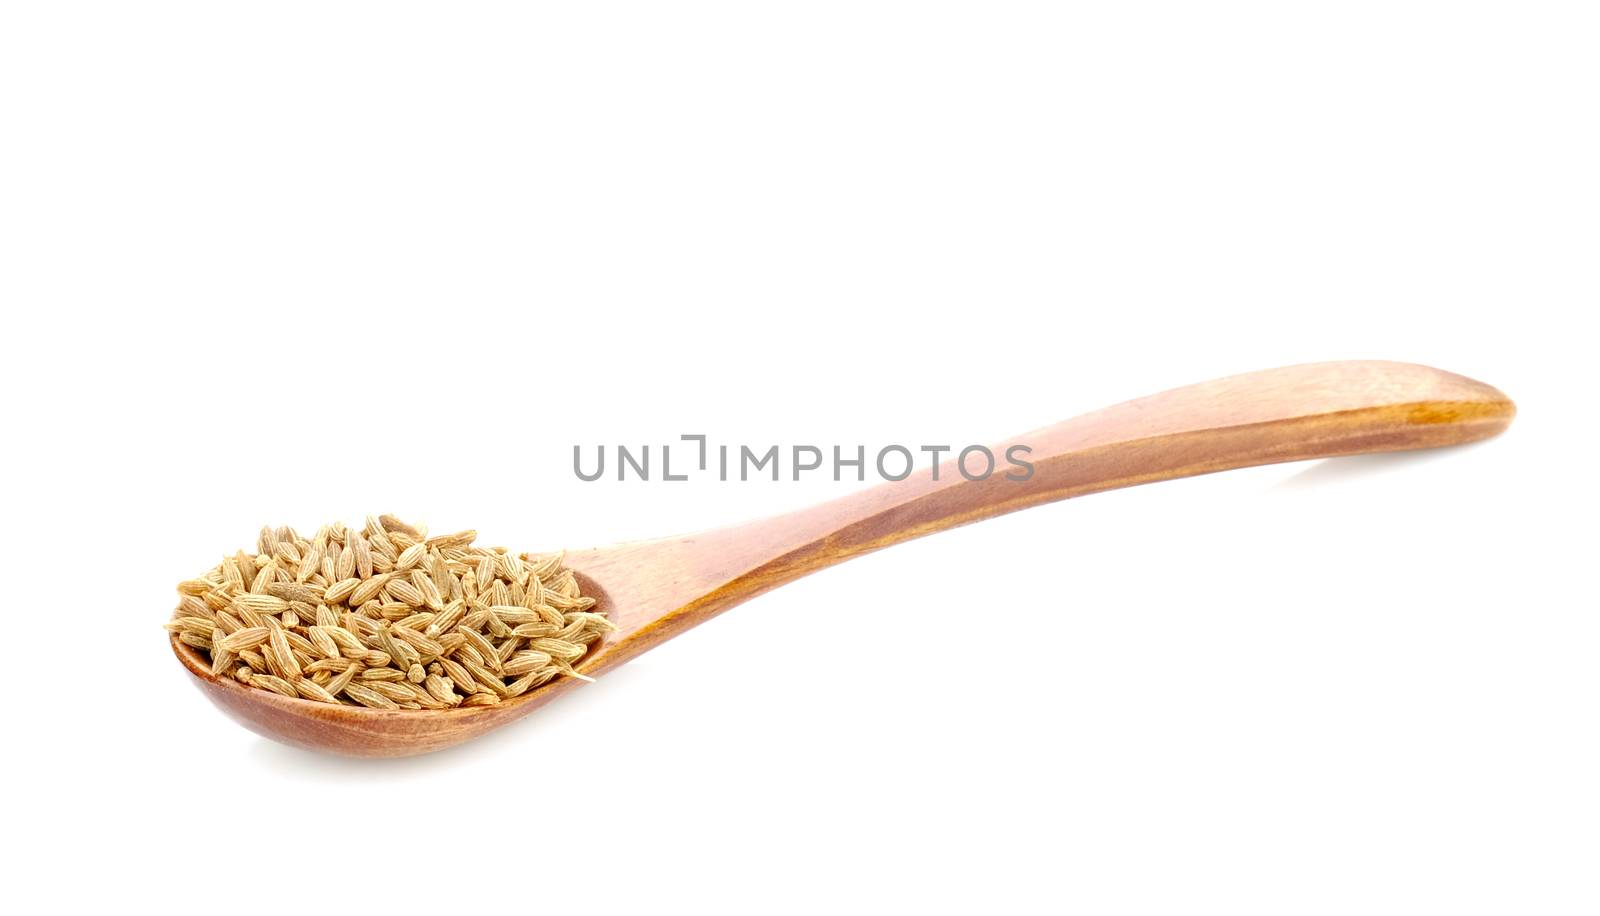 Cumin seeds in wood spoon on white background. by poungsaed